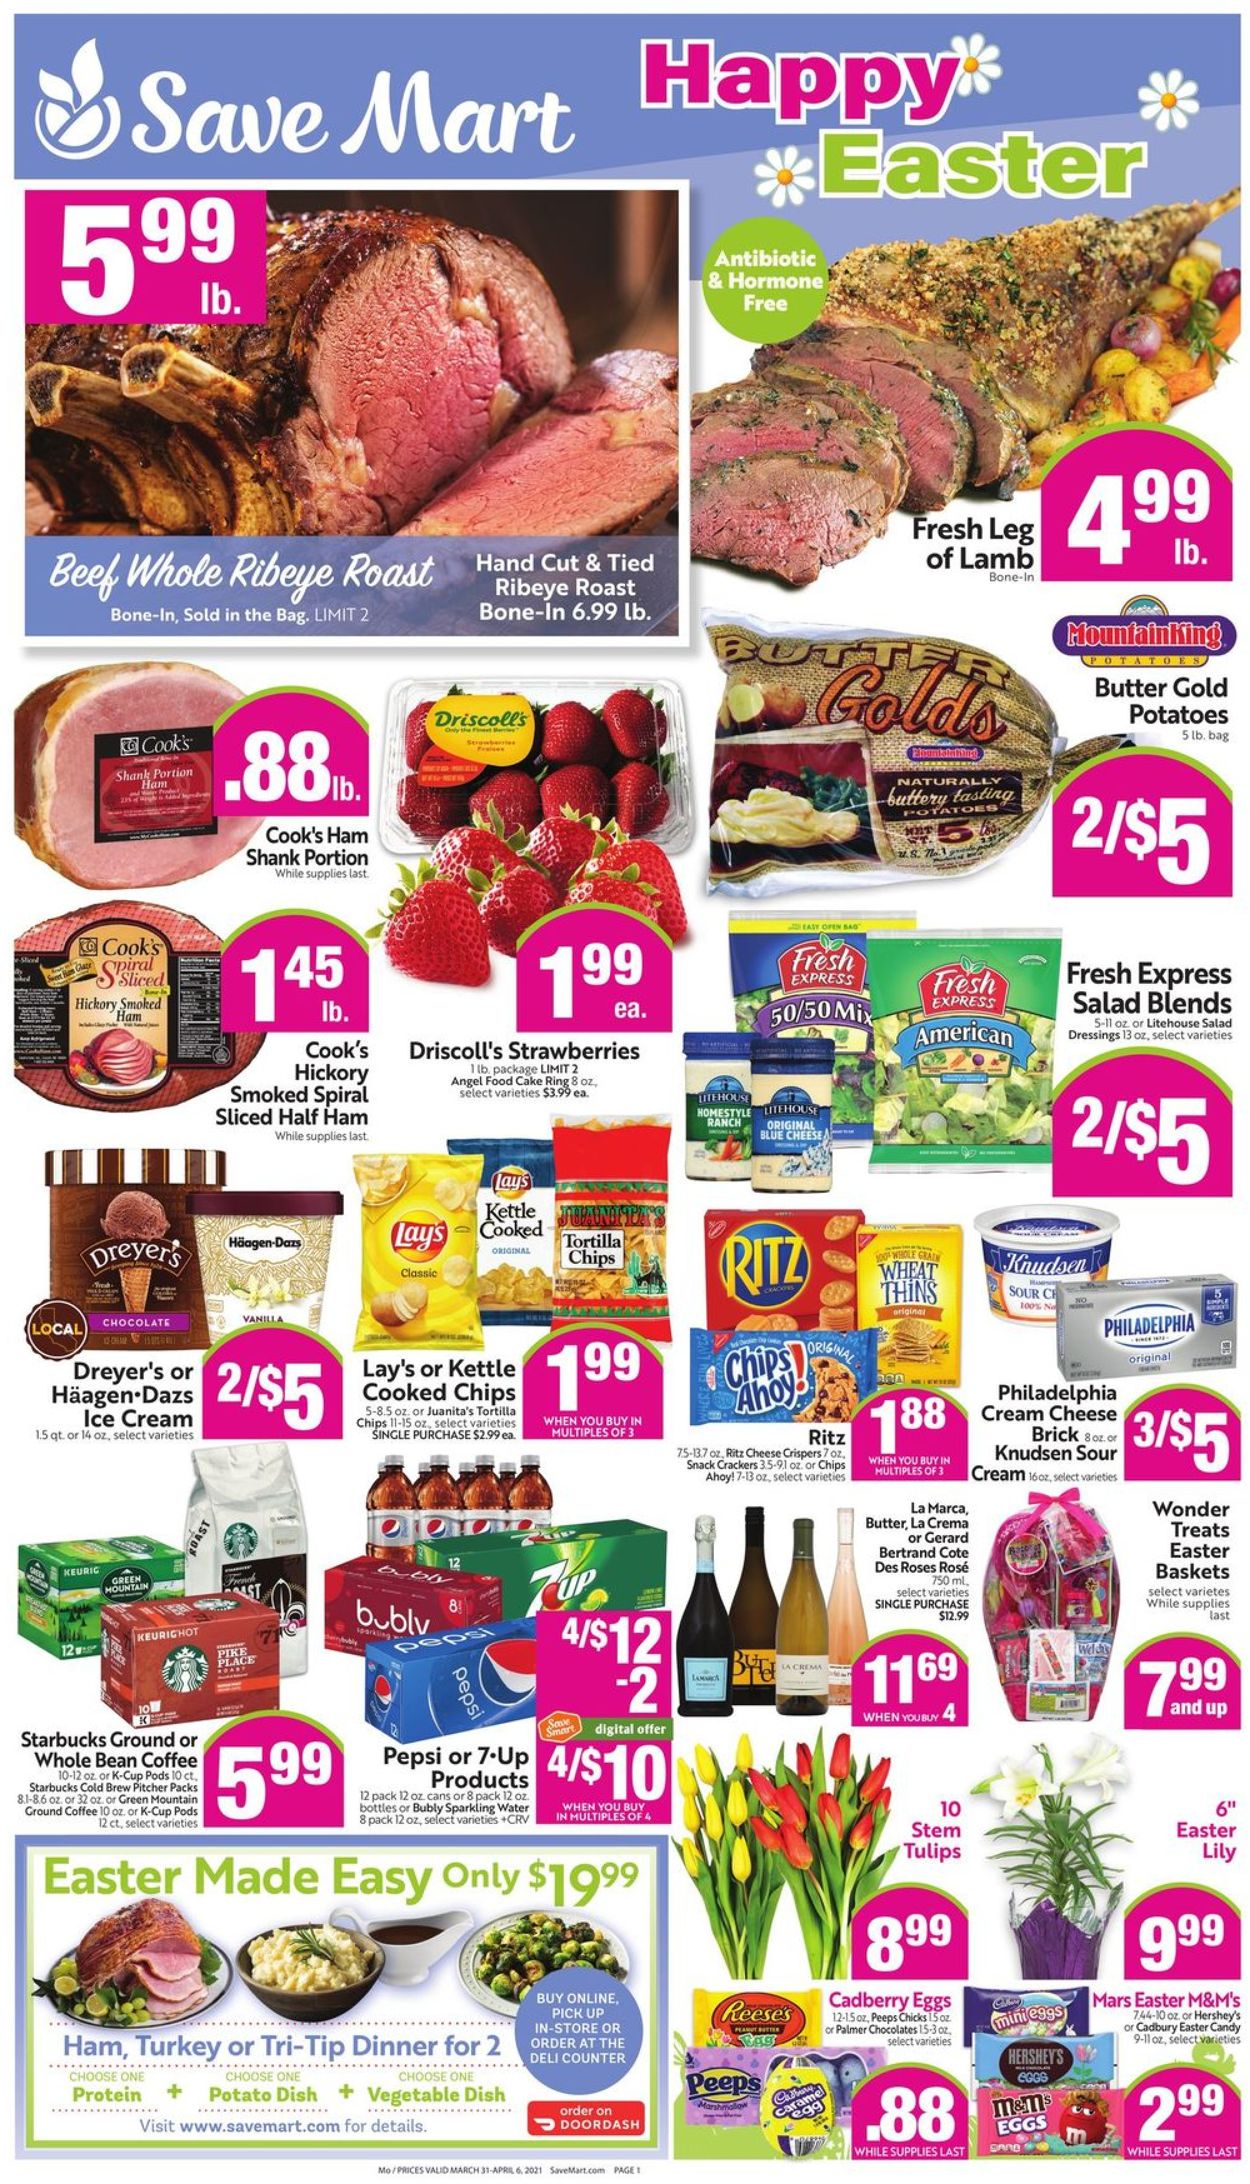 Catalogue Save Mart Easter 2021 ad from 03/31/2021